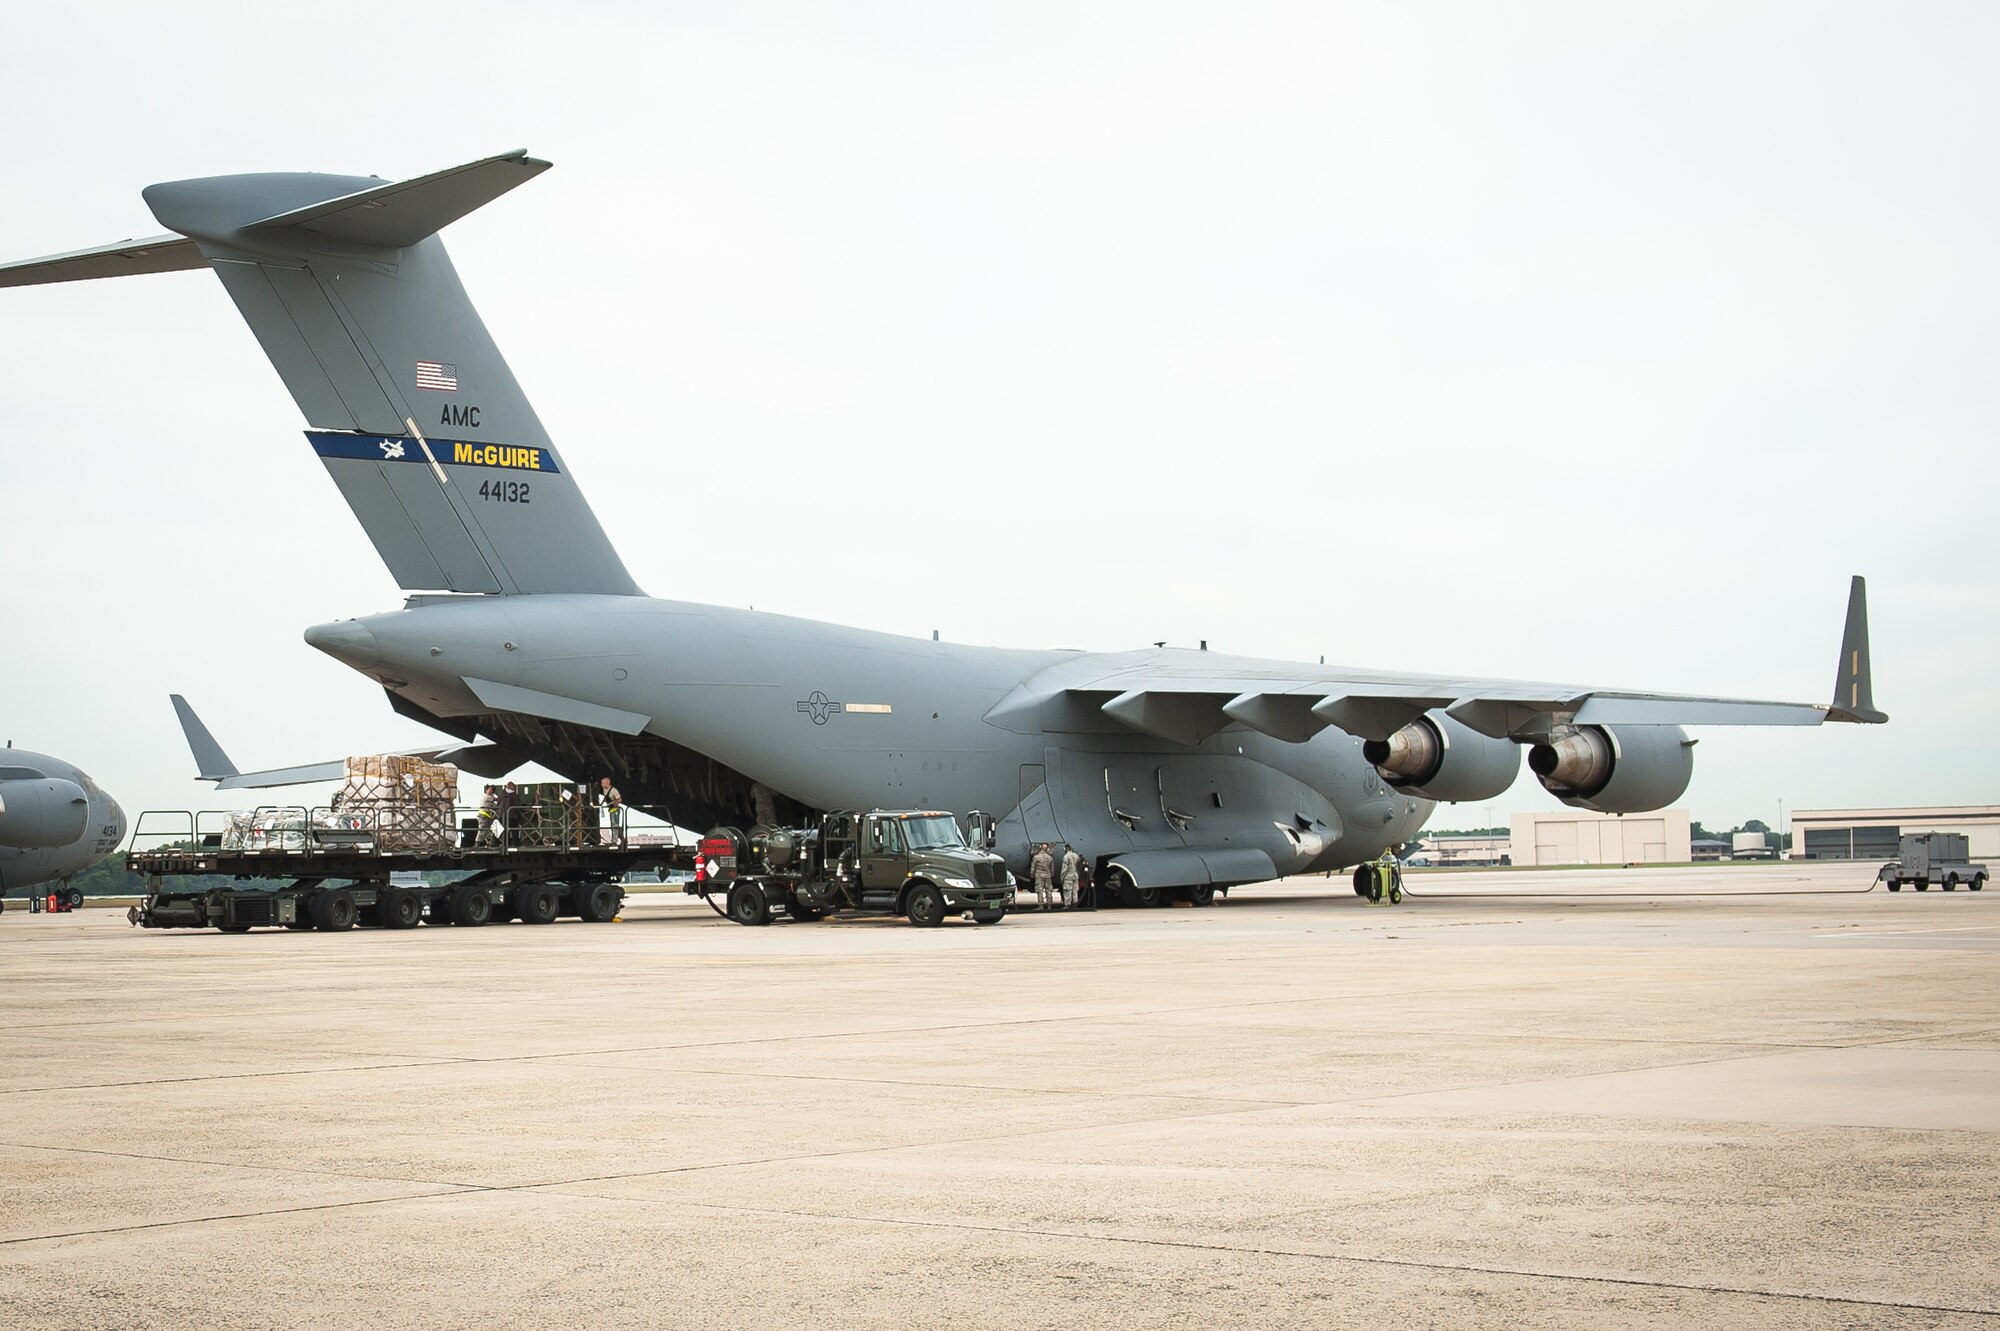 JOINT BASE MCGUIRE-DIX-LAKEHURST, N.J. - Airmen from the 305th Air Mobility Wing load cargo from the 621st Contingency Response Wing onto a Globemaster III C-17 before they deploy to West Africa here, Sept. 24, 2014. The 621st Contingency Response Wing's alert unit, 817th Contingency Response Group, is deploying to West Africa in support of Operation UNITED ASSISTANCE in response to the Ebola virus disease outbreak. The 621st Contingency Response Wing is highly-specialized in training and rapidly deploying personnel to quickly open airfields and establish, expand, sustain, and coordinate air mobility operations. From wartime taskings to disaster relief, the 621st extends Air Mobility Command's reach in deploying people and equipment around the globe. (U.S. Air Force photo by Russell Meseroll)